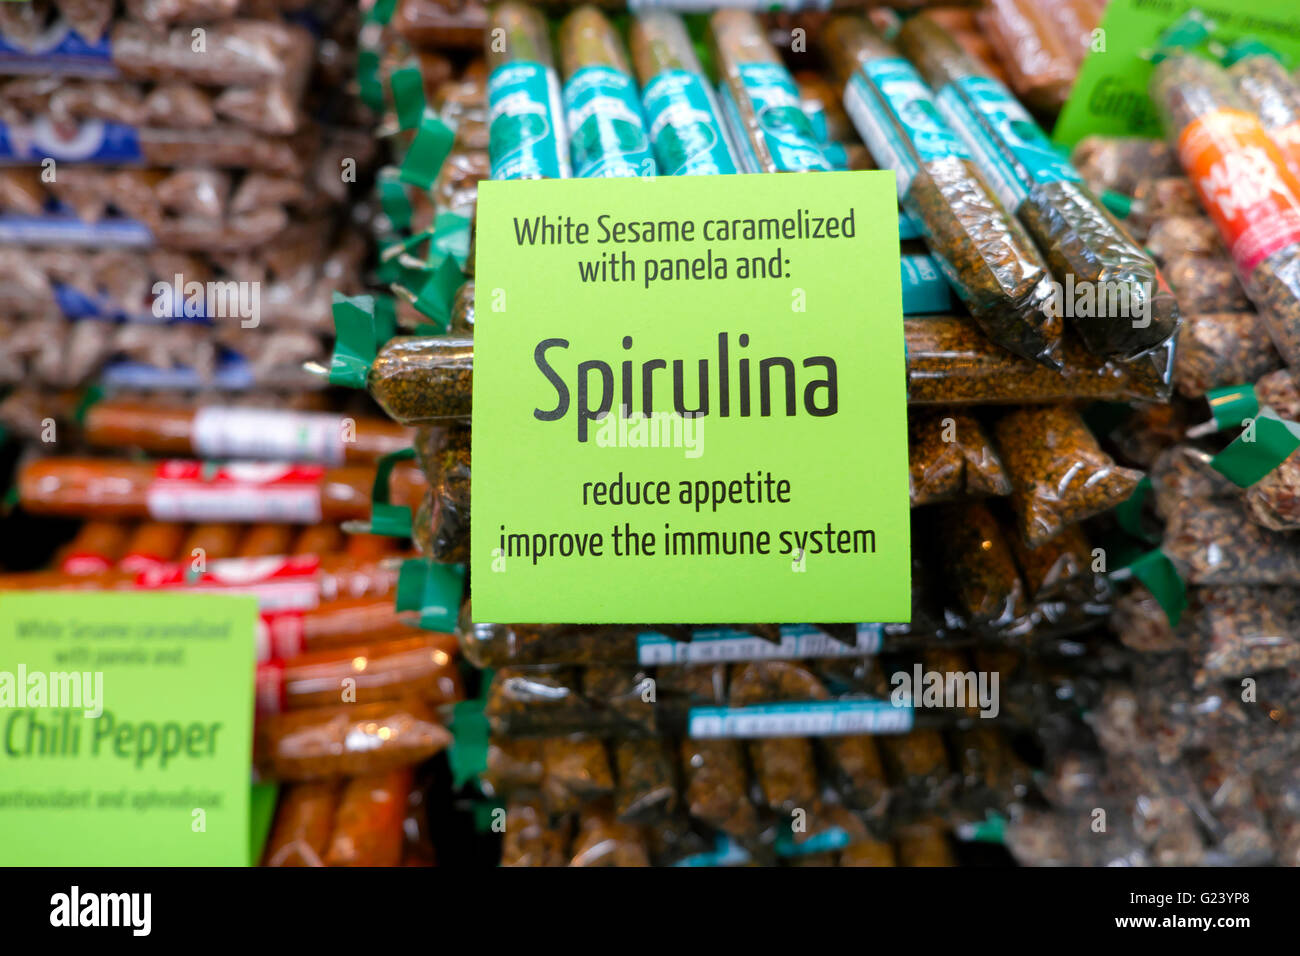 Packets of Spirulina superfood to strengthen immune system at Spitalfields Market Spanish food festival in April 2016  East London UK  KATHY DEWITT Stock Photo